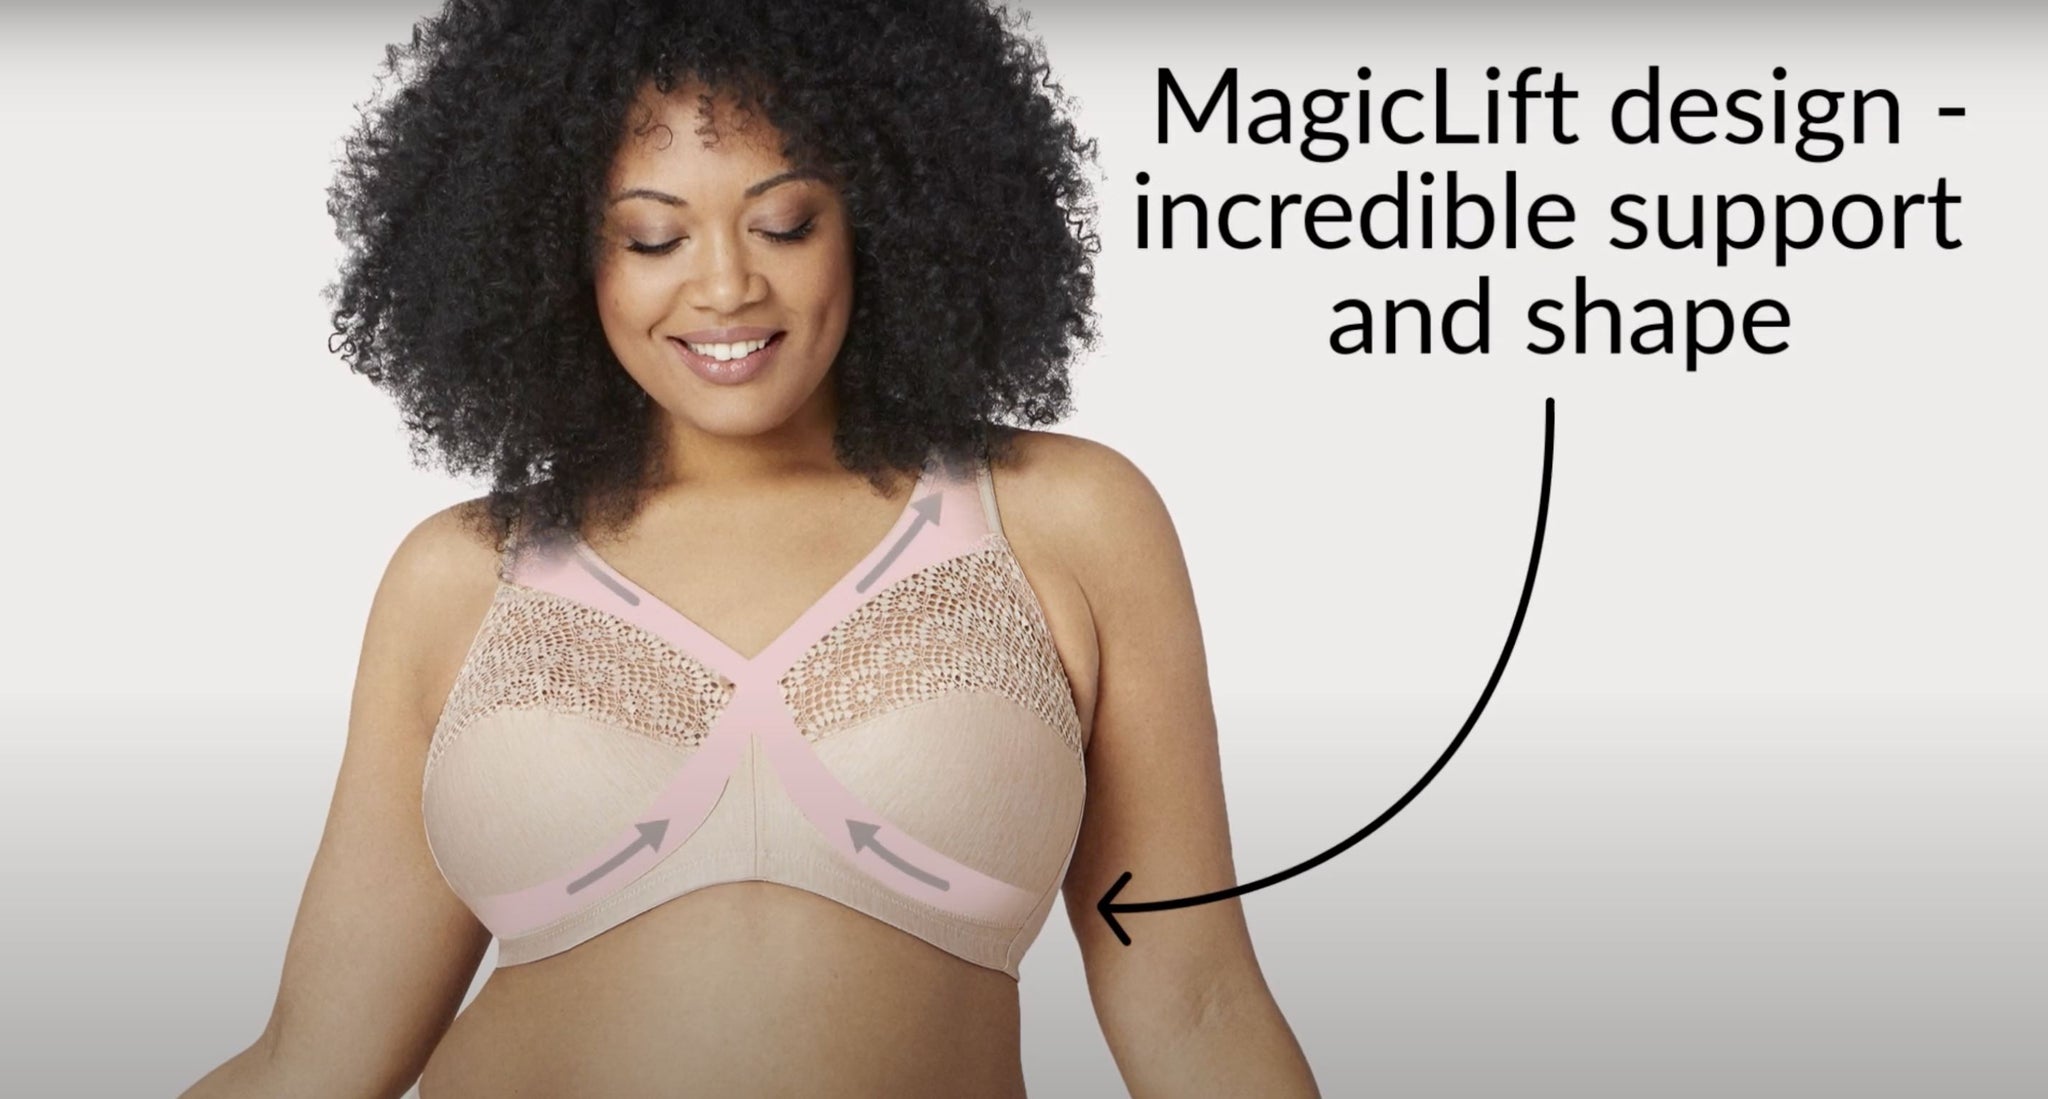 Donate To Lift The Bra Project — LIFT the bra project